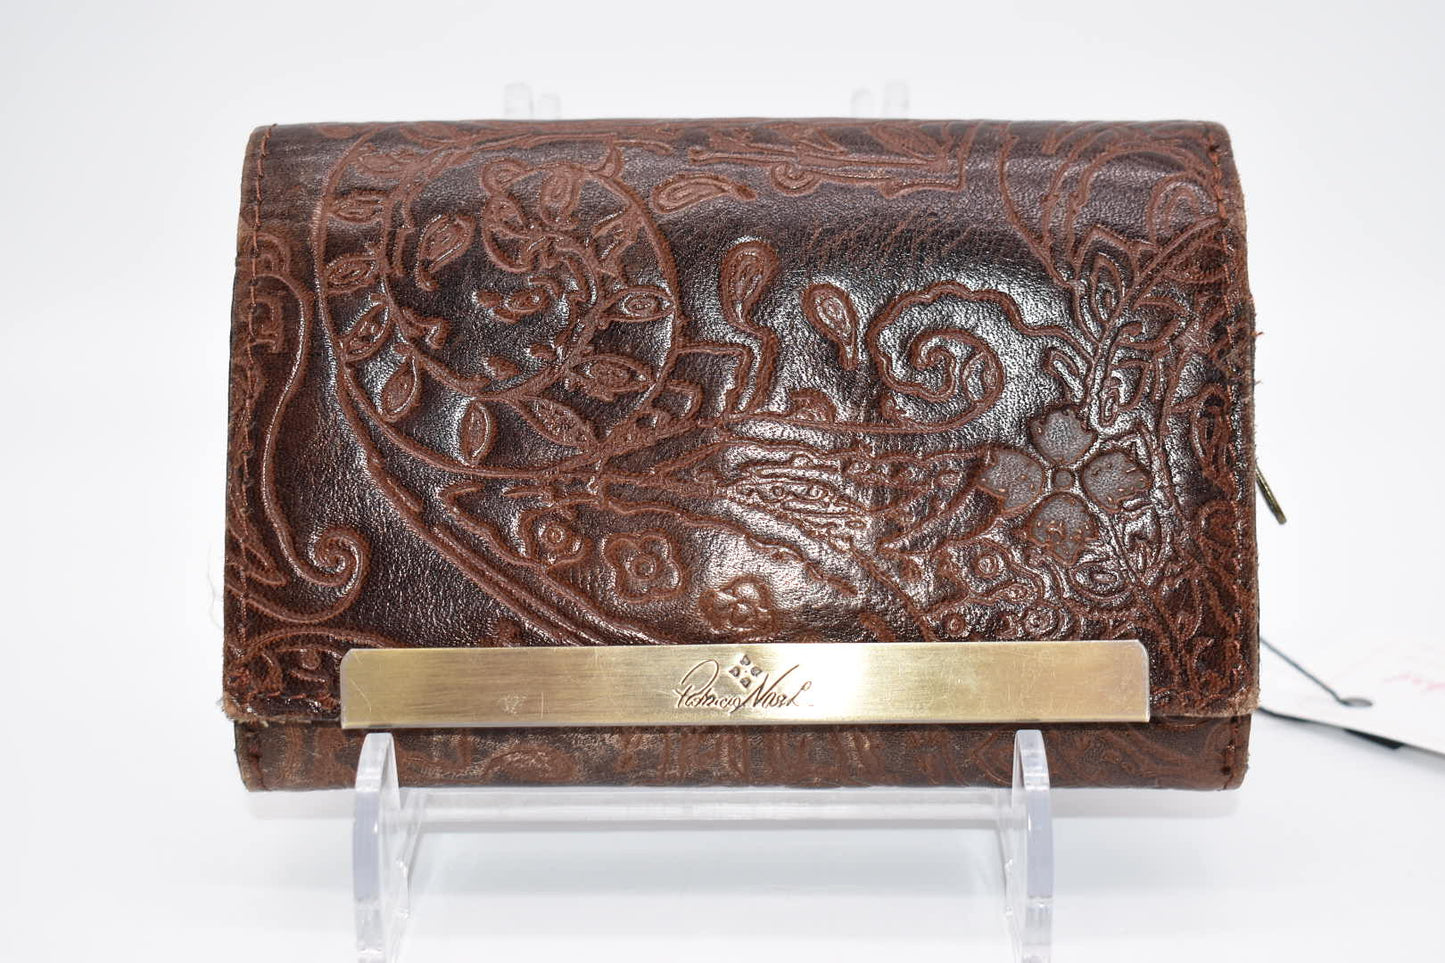 Patricia Nash Tooled Leather Cametti Wallet